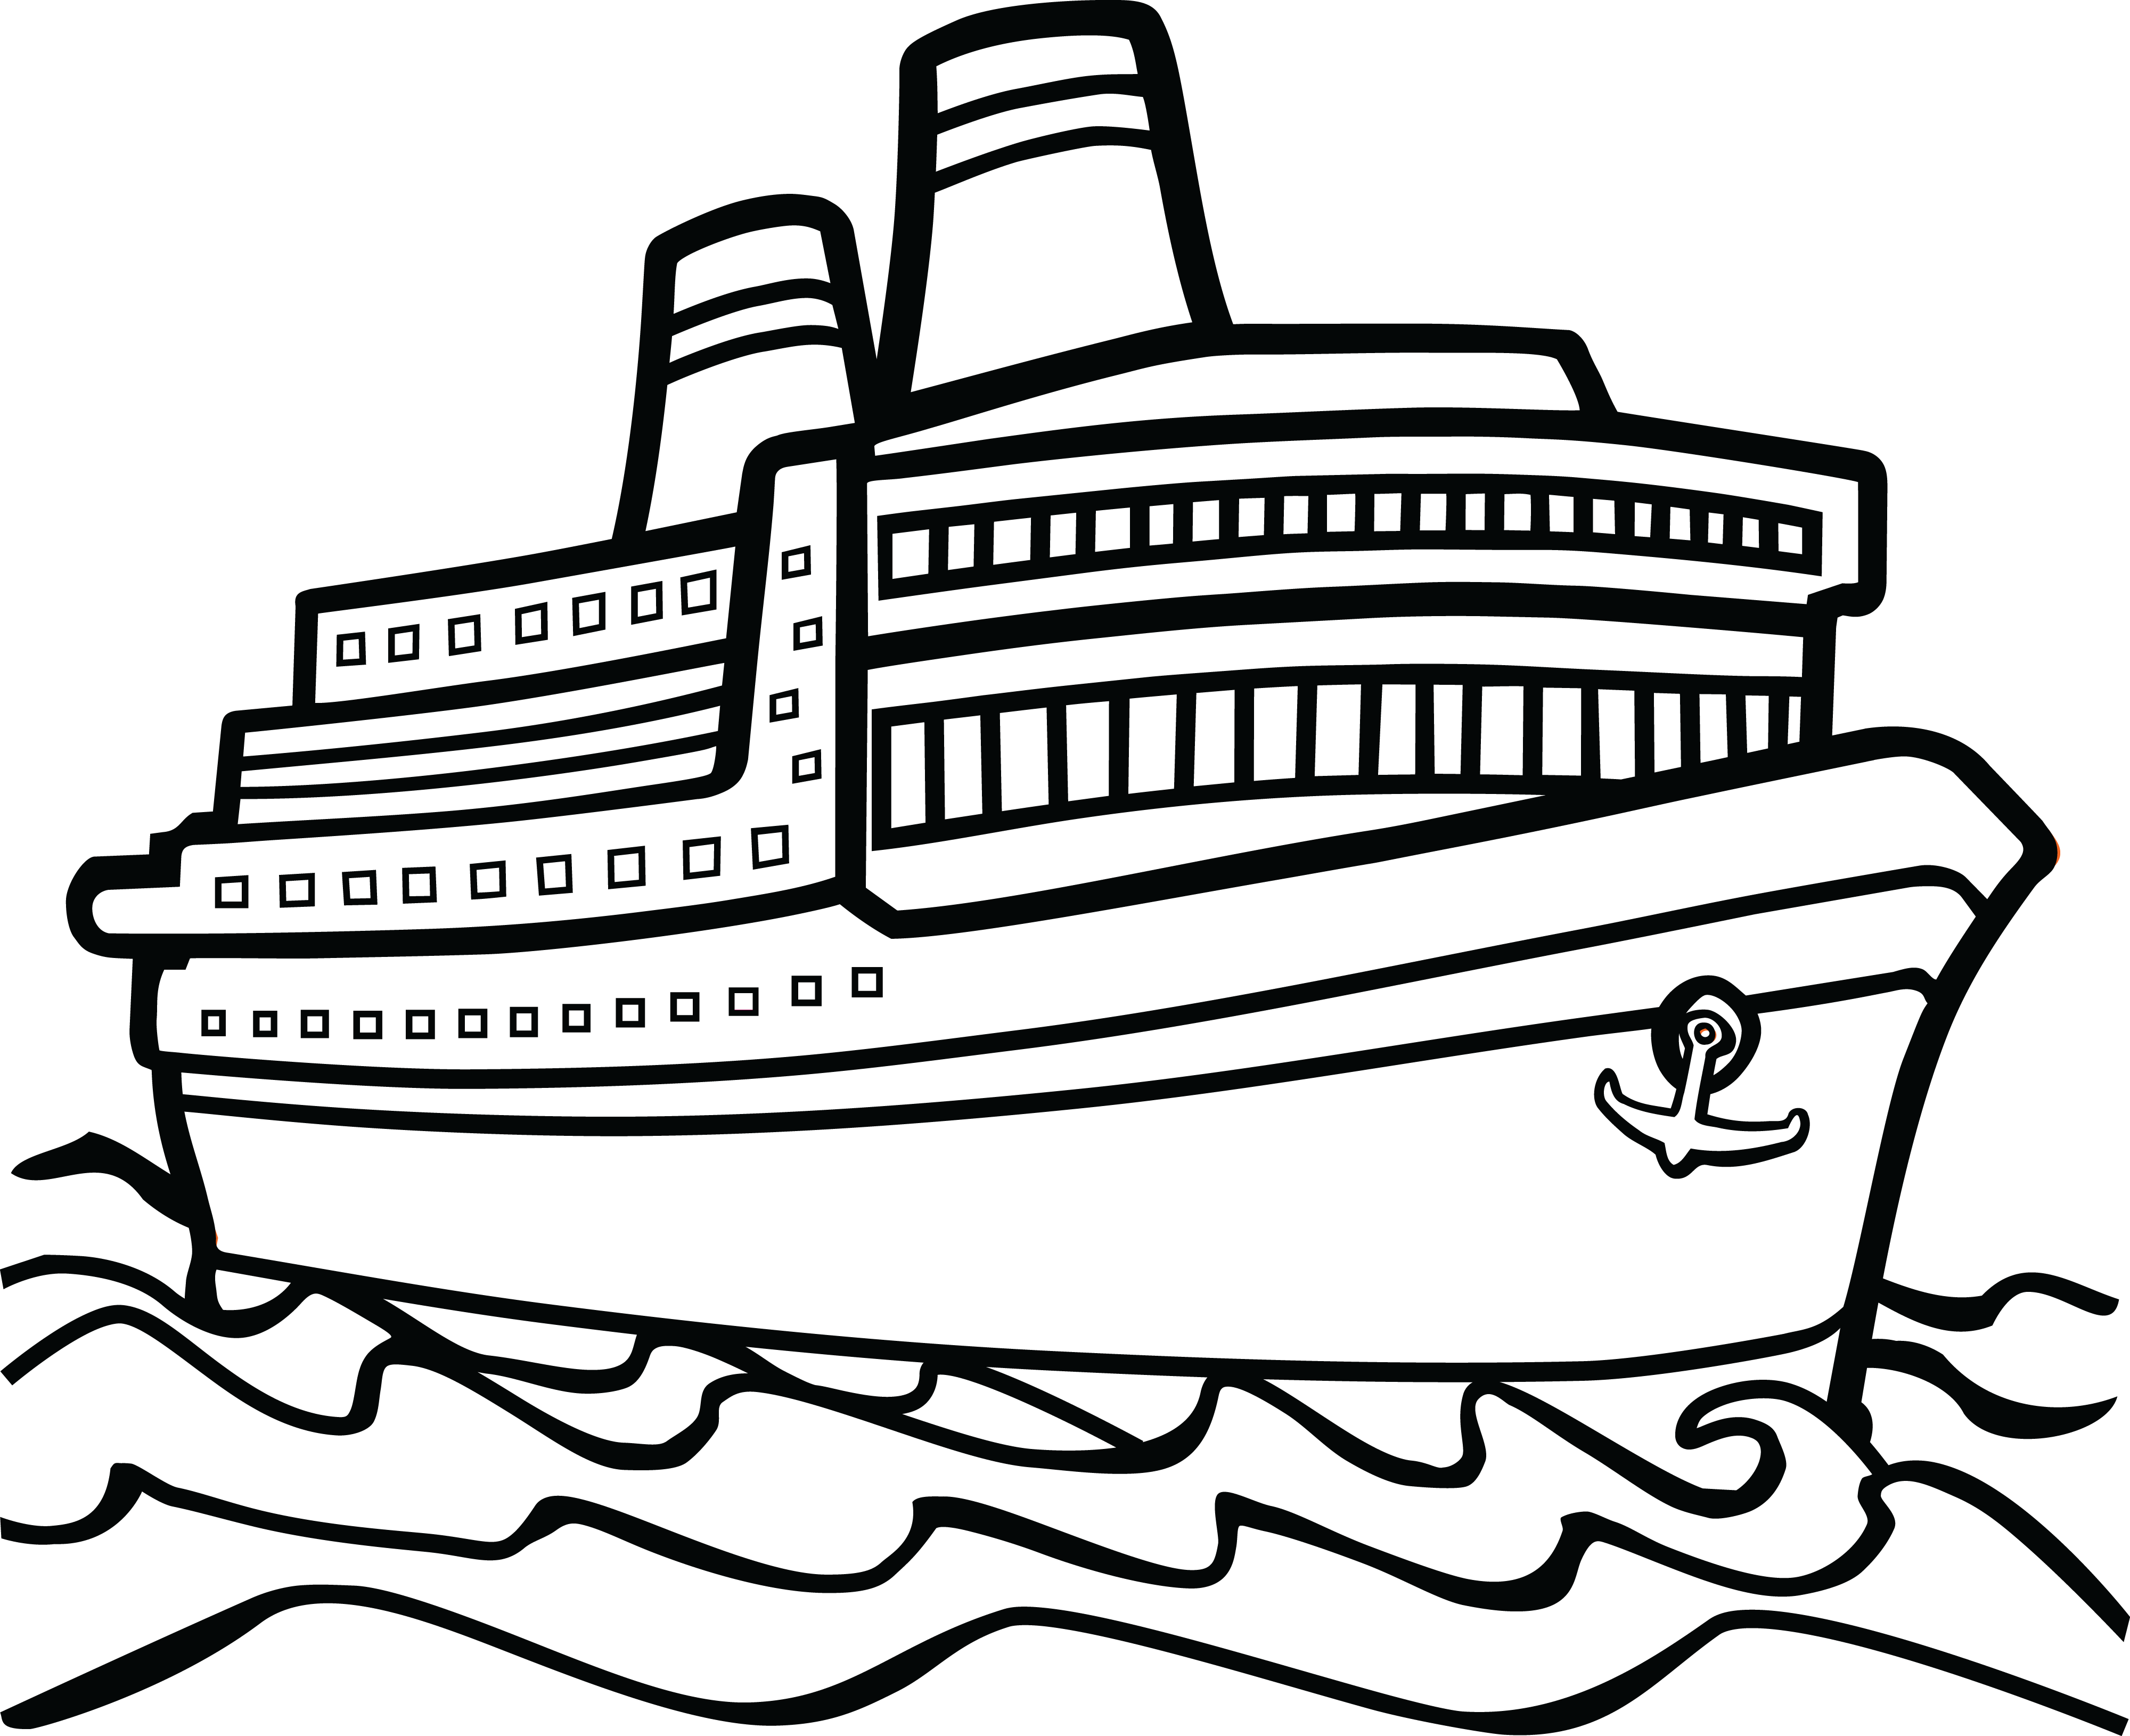 Boating clipart black and white. Top boat free of